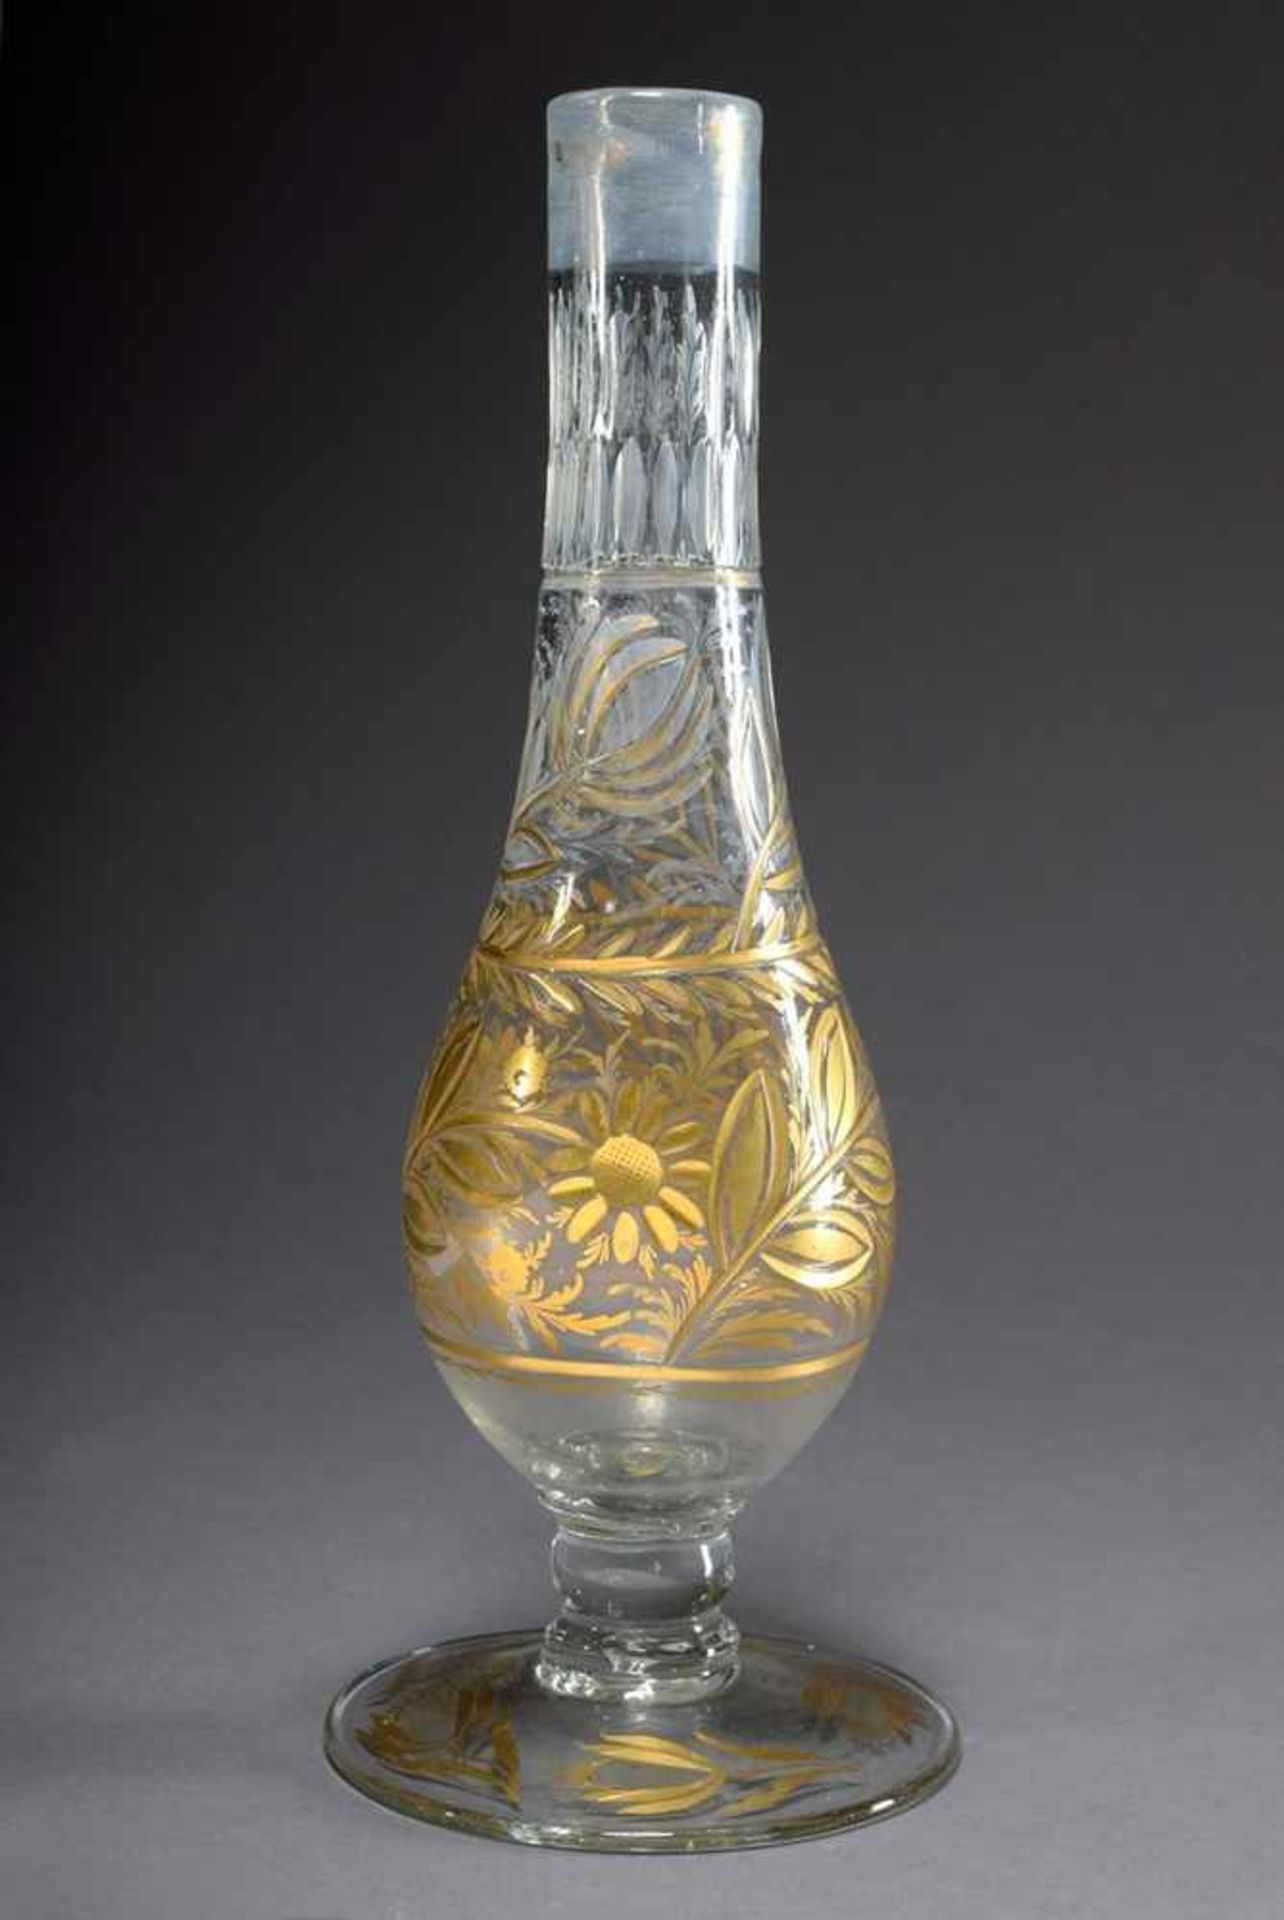 Ottoman beycoz (rosewater sprinkler) or nargile (water pipe), glass with gold painted floral cut,